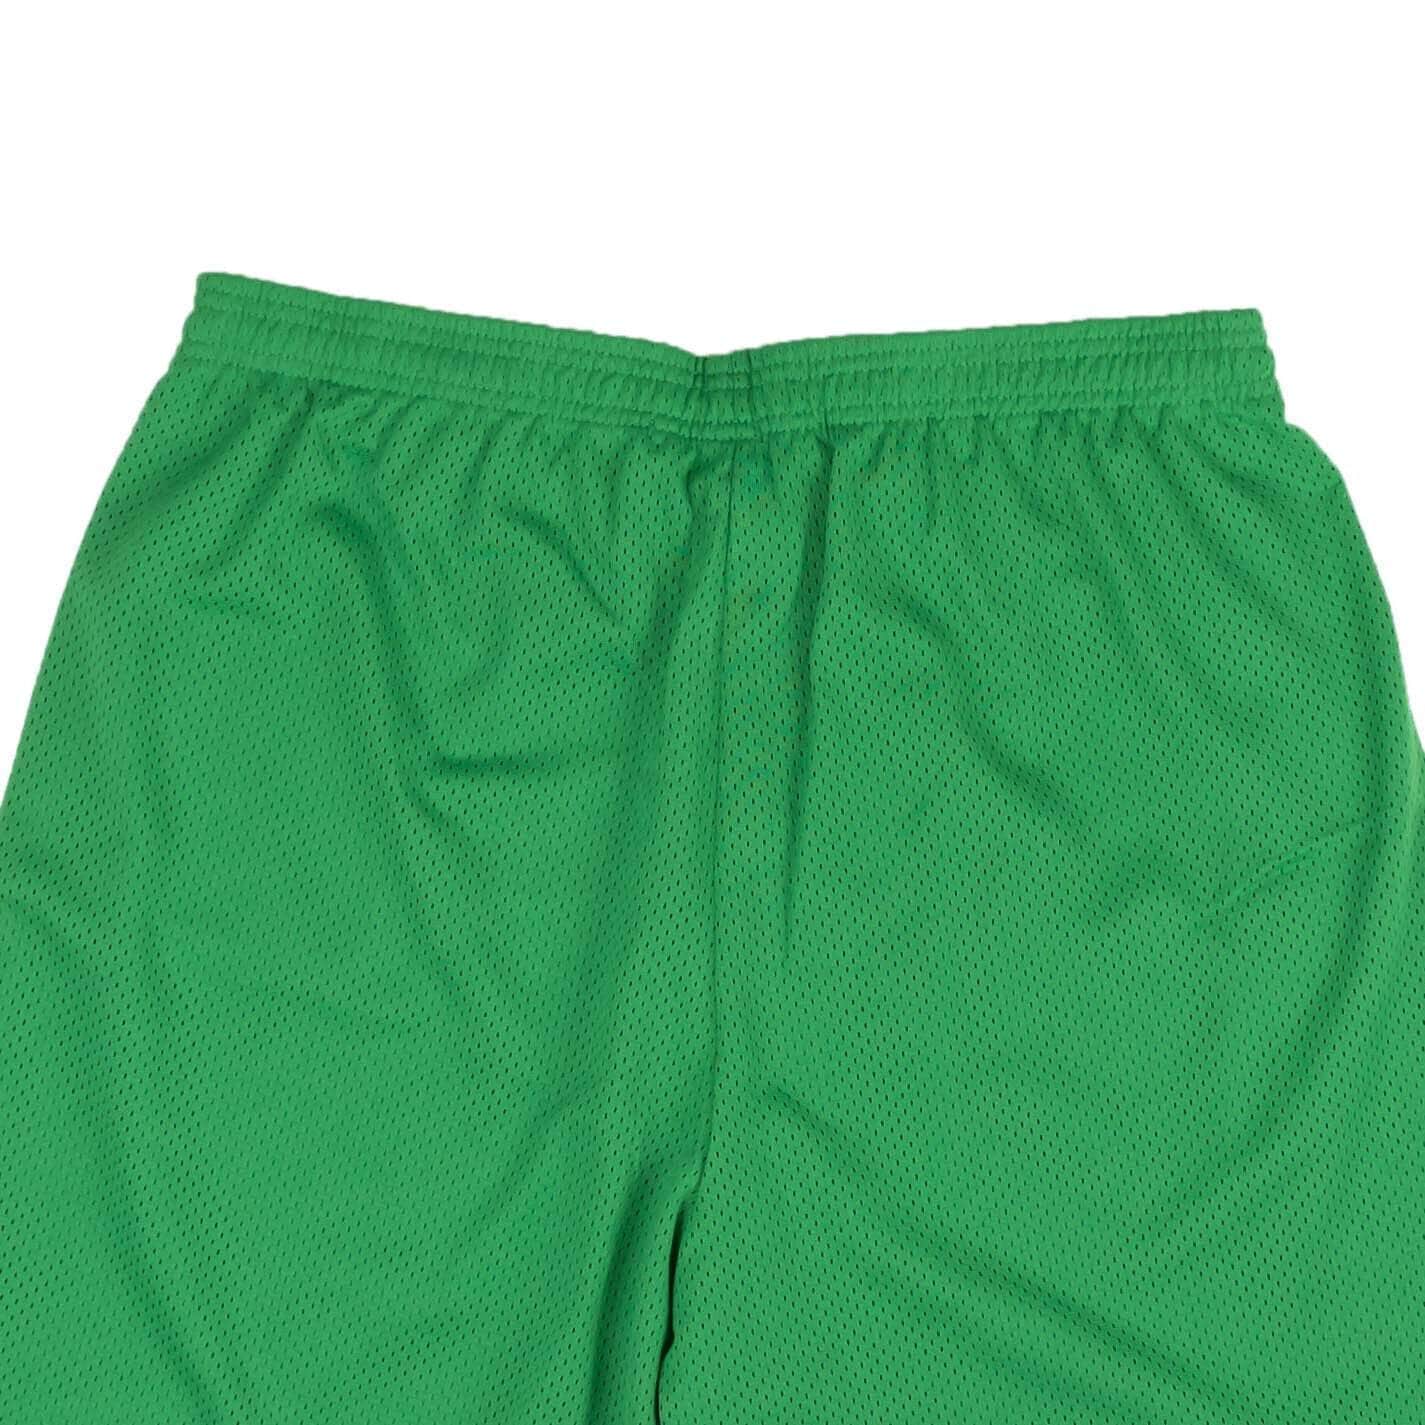 Visitor on Earth channelenable-all, chicmi, couponcollection, gender-mens, main-clothing, mens-shoes, size-l, size-m, size-s, under-250, visitor-on-earth S Green White Logo Mesh Shorts 95-VOE-1014/S 95-VOE-1014/S